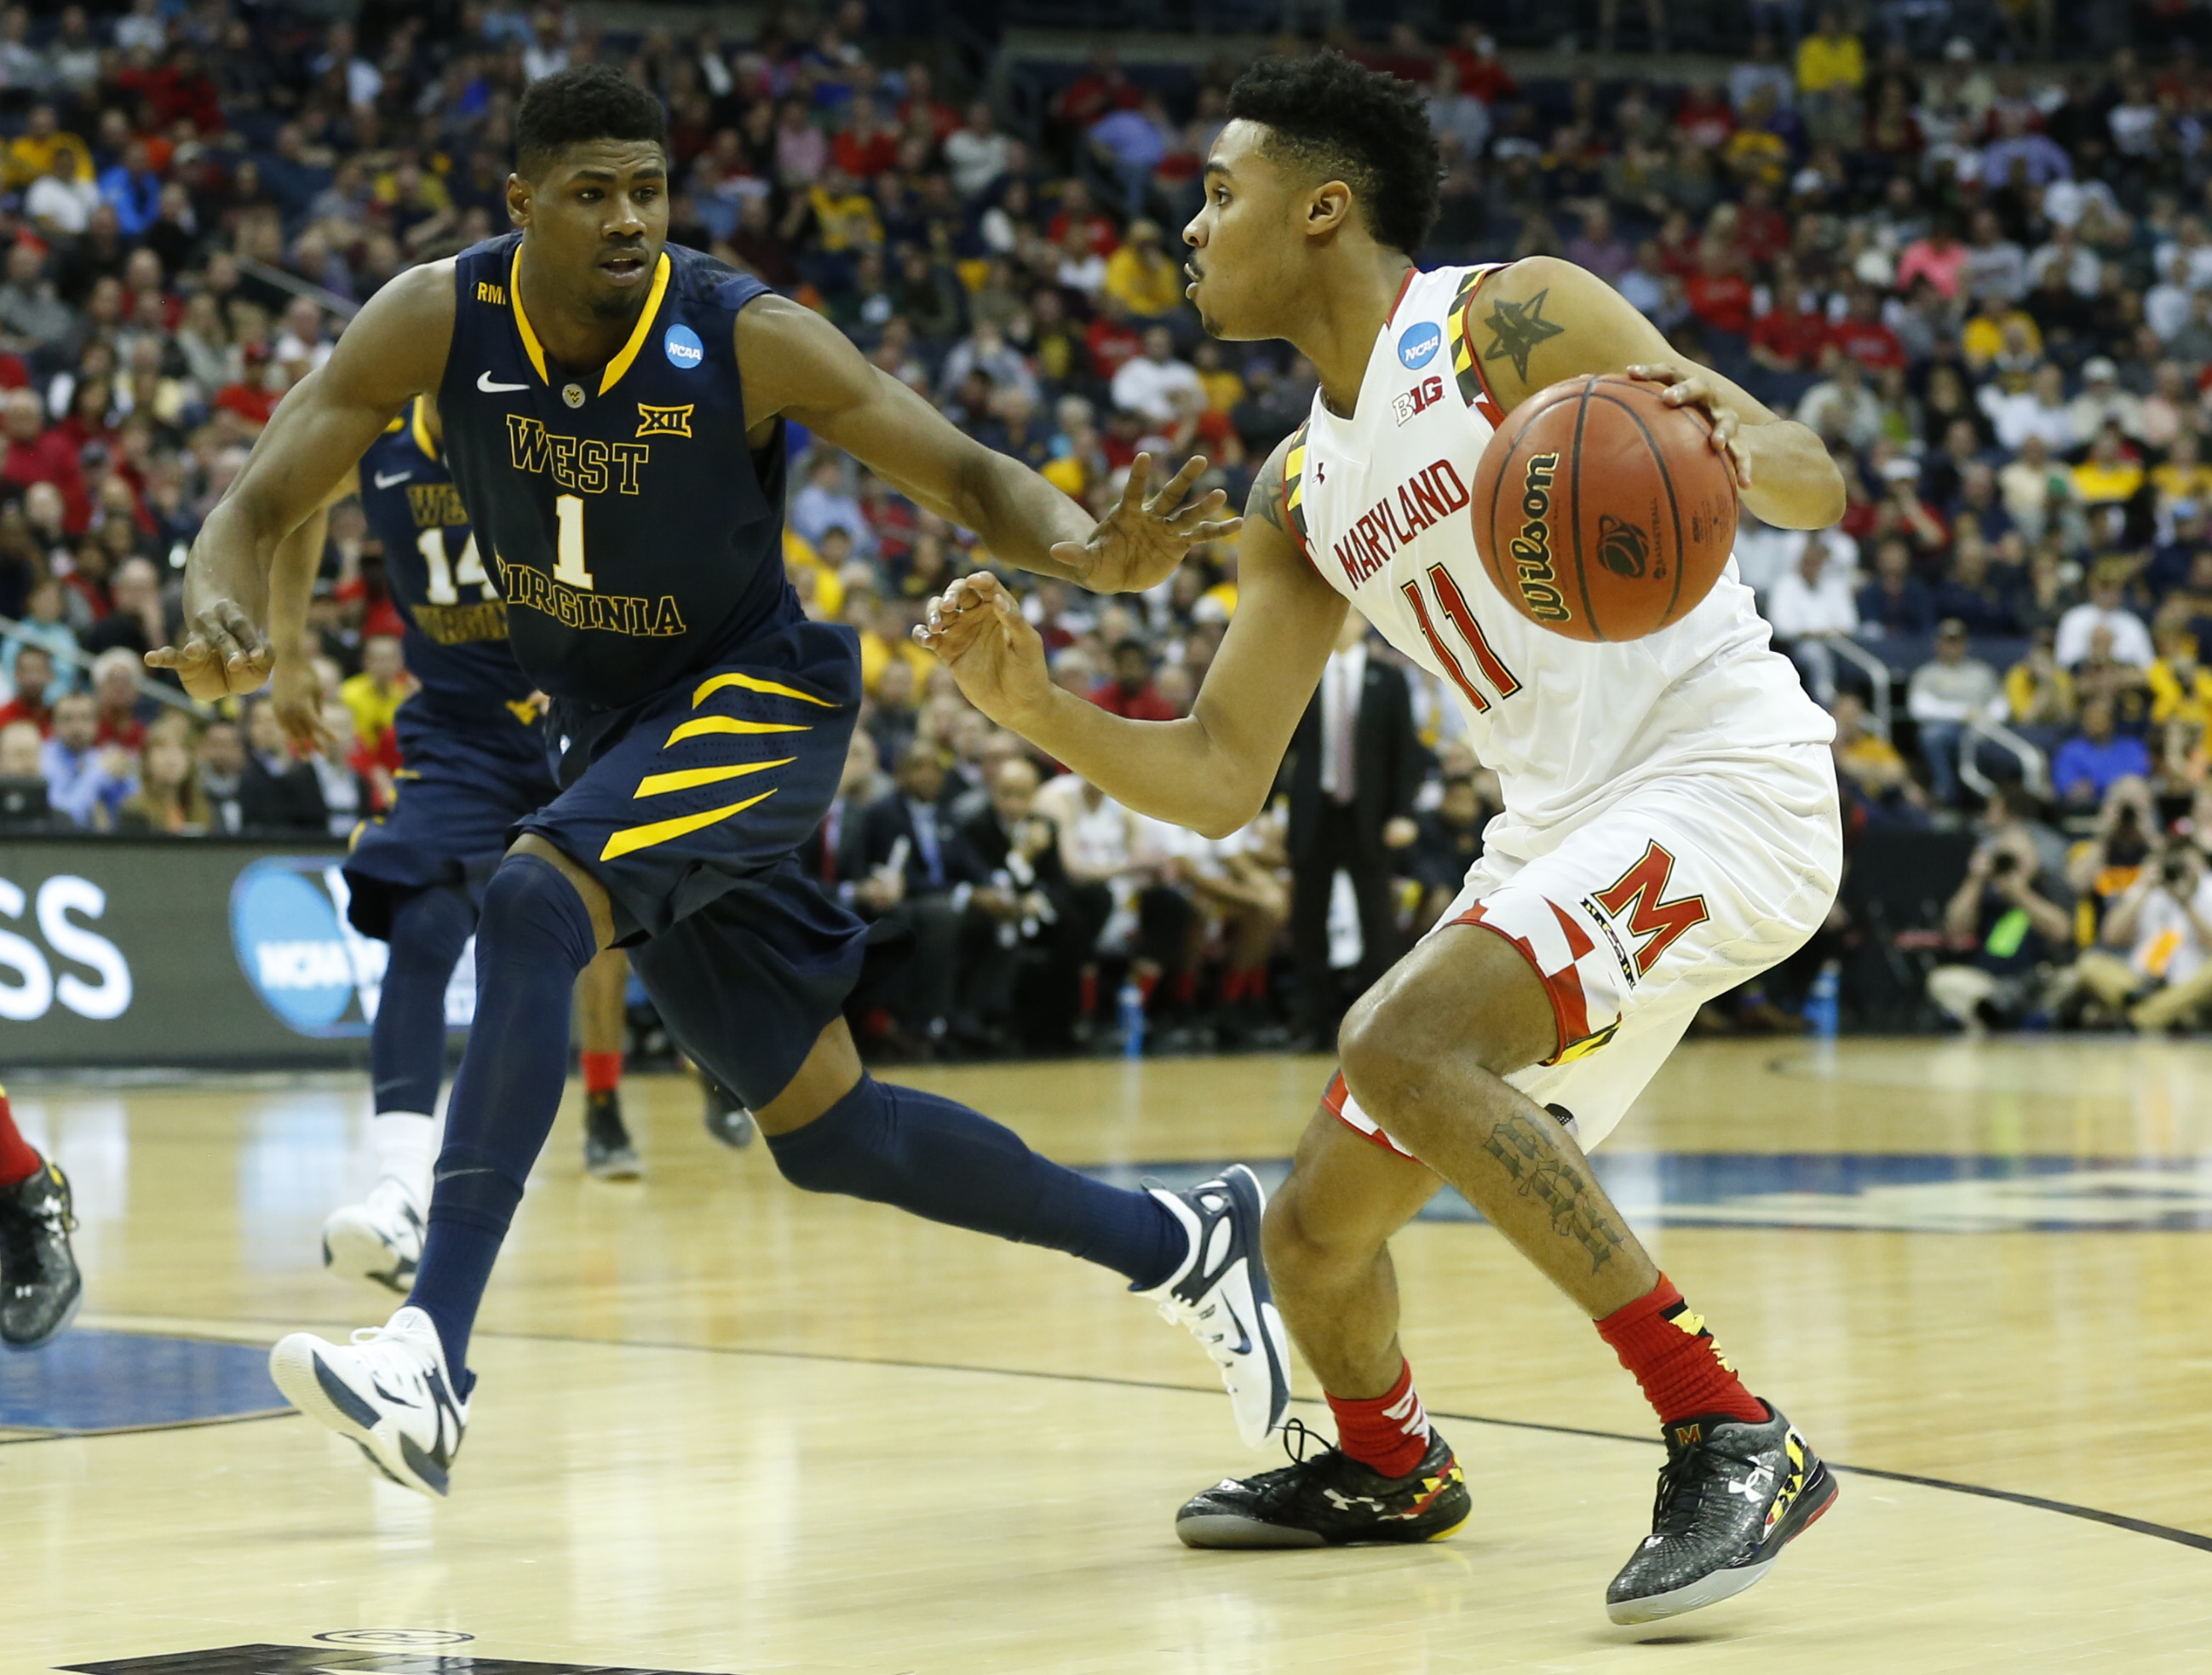 Mar 22, 2015; Columbus, OH, USA; Maryland Terrapins guard/forward Jared Nickens (11) dribbles while guarded by West Virginia Mountaineers forward Jonathan Holton (1) during the first half in the third round of the 2015 NCAA Tournament at Nationwide Arena. Mandatory Credit: Greg Bartram-USA TODAY Sports